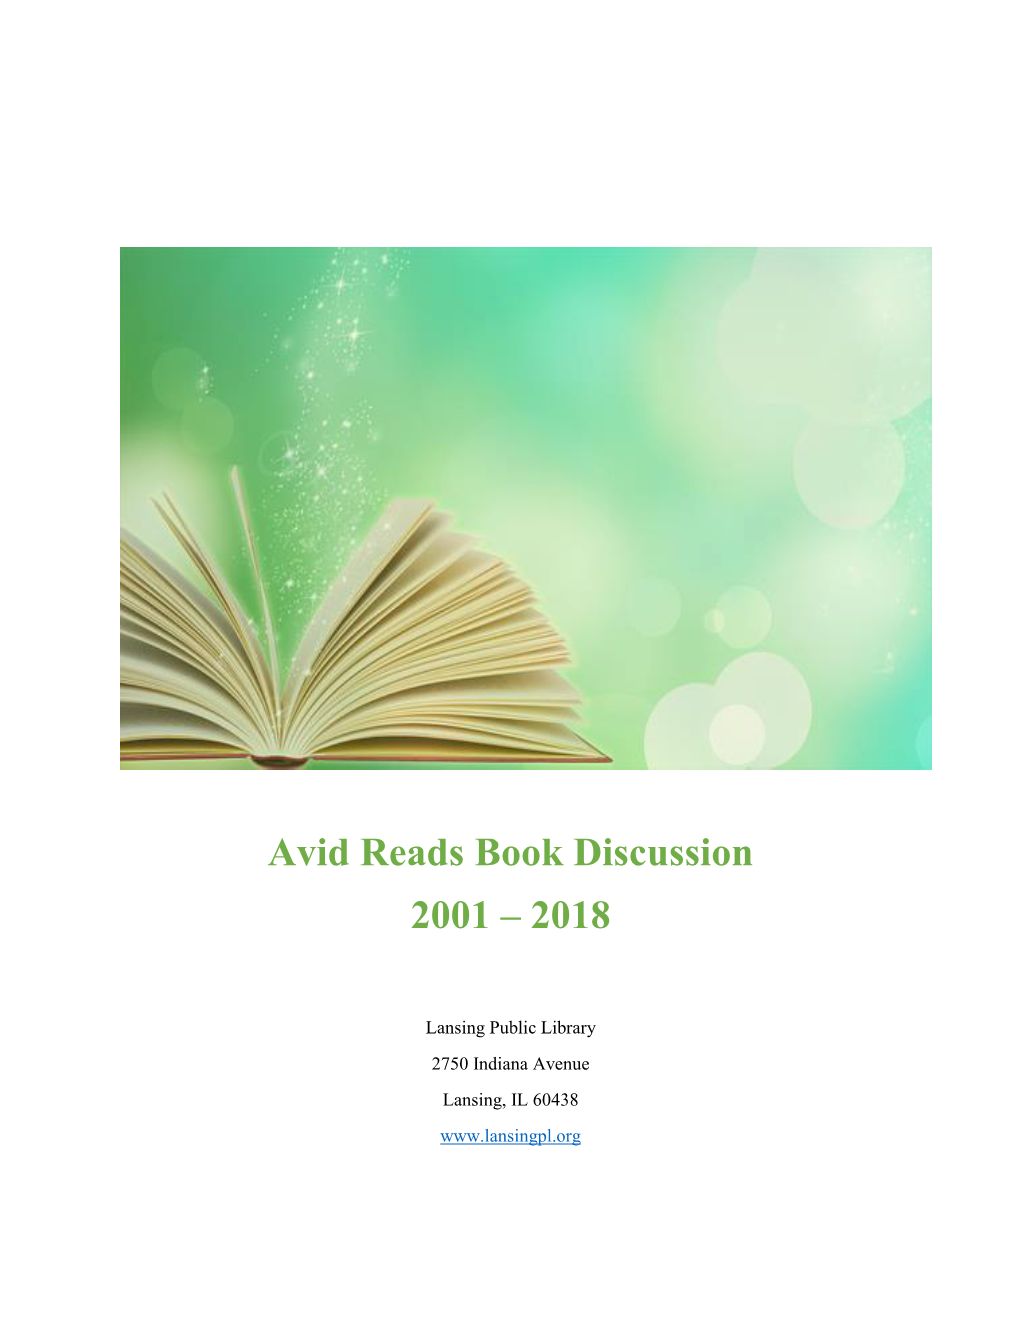 Avid Reads Book Discussion 2001 – 2018